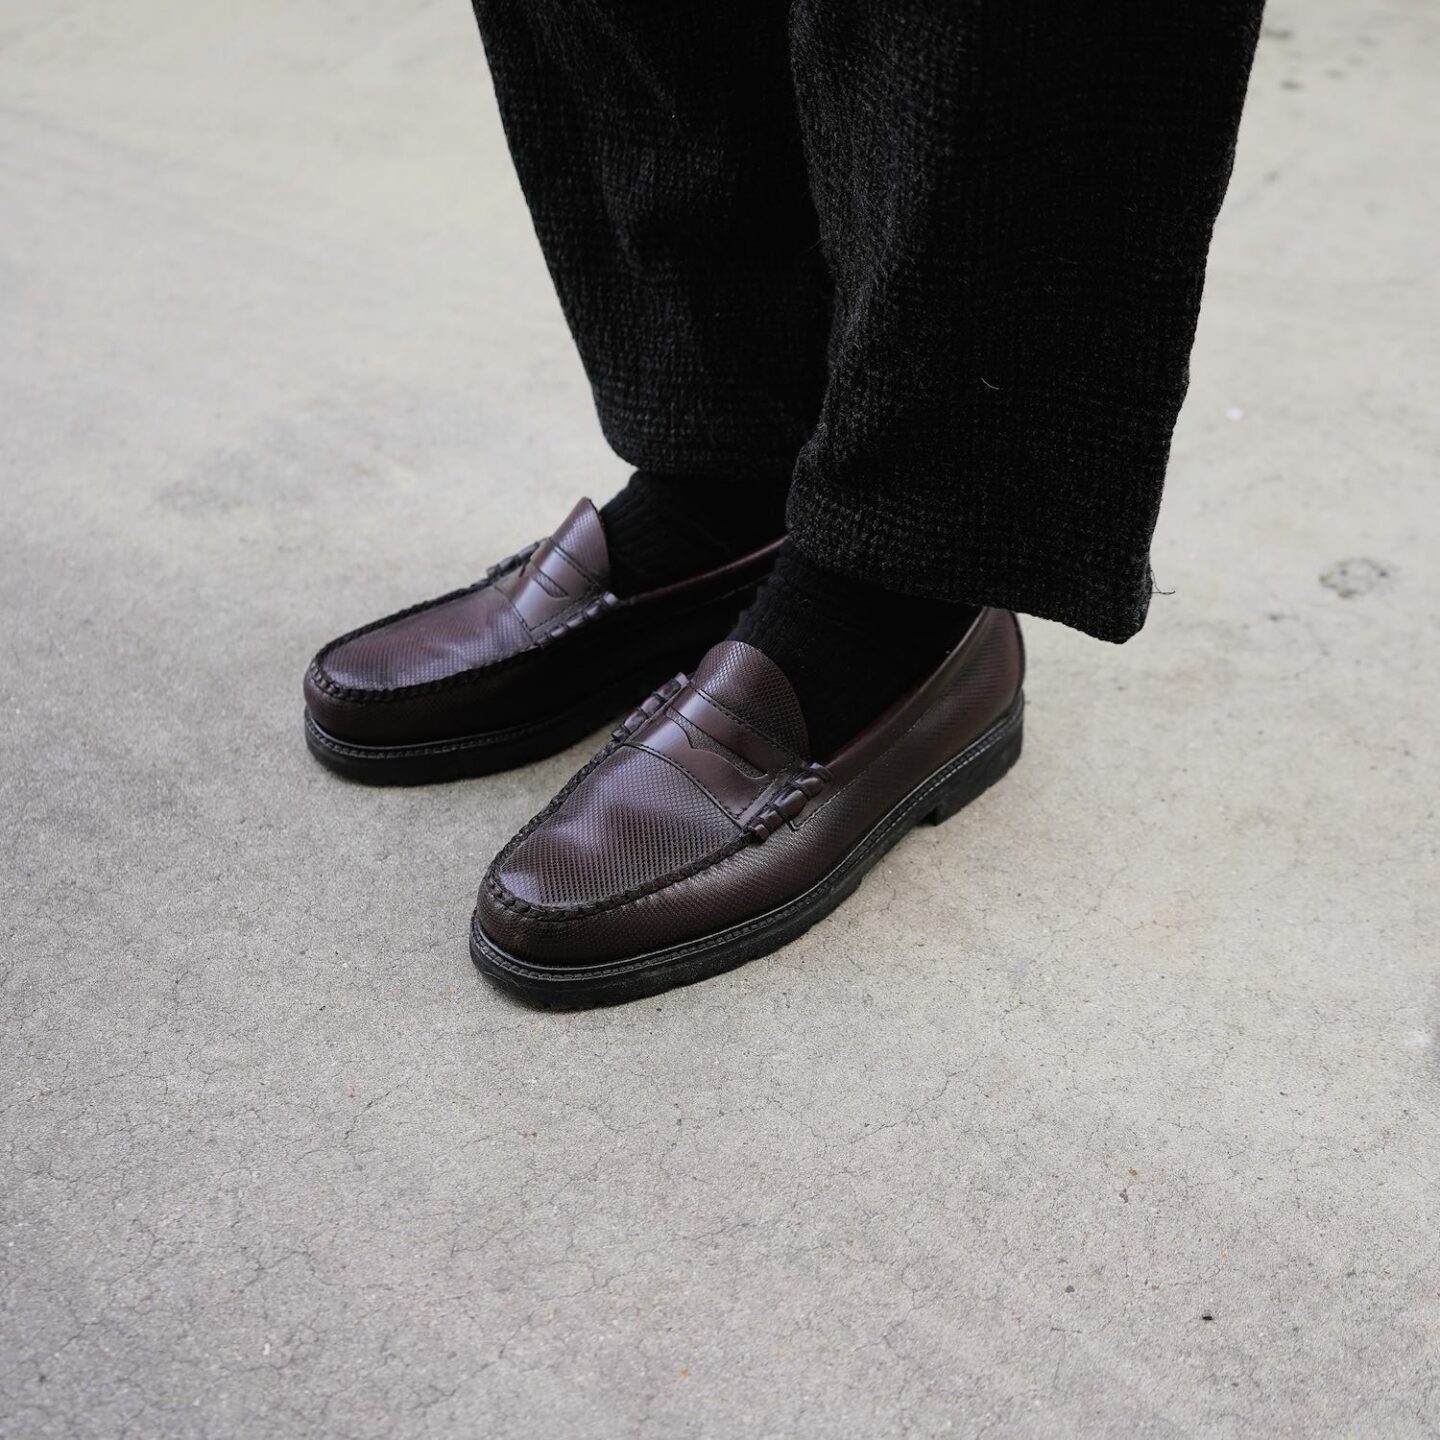 double pleats wool a kind of guise & mocassins penny loafers GH Bass